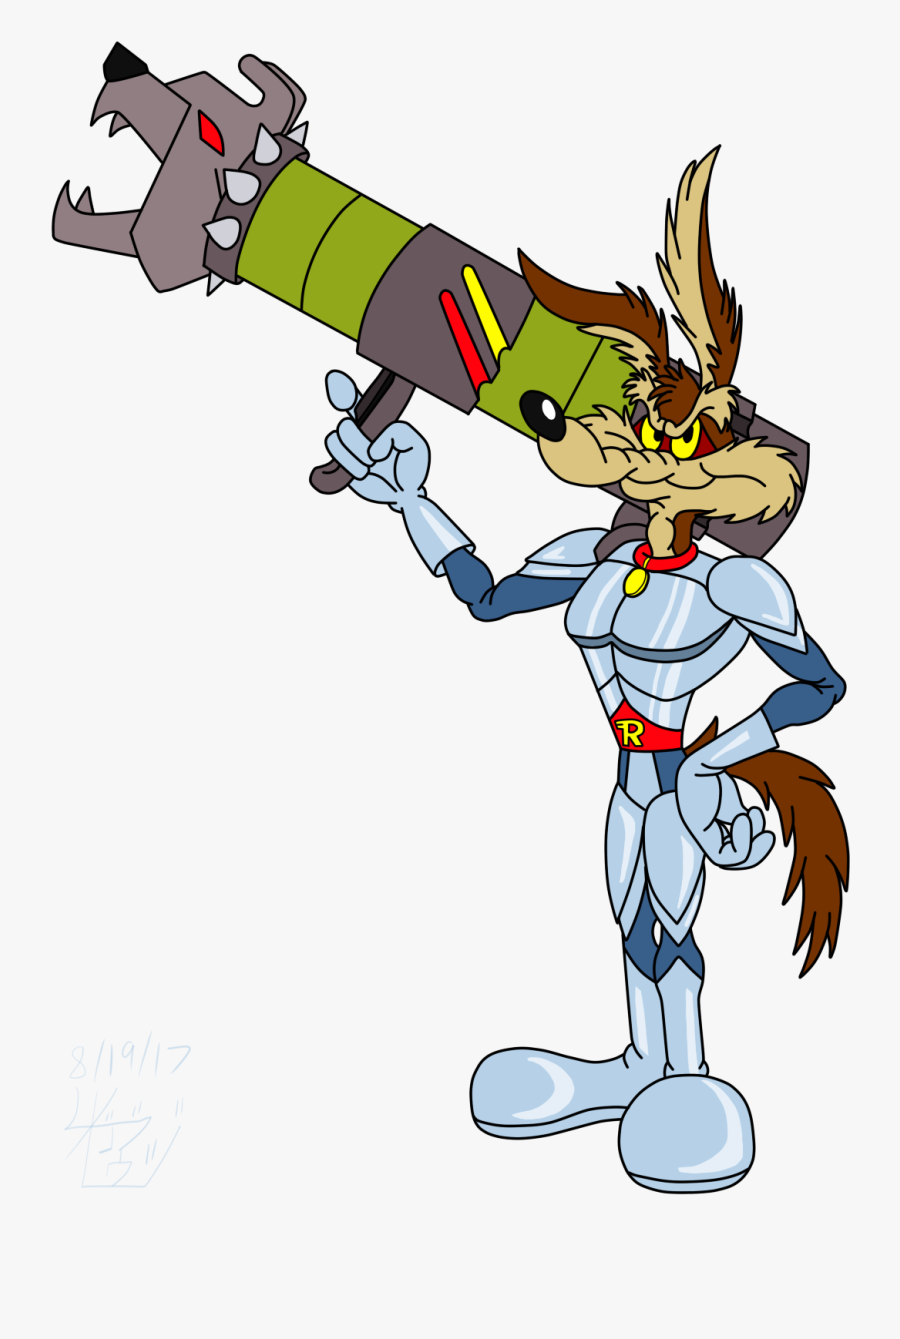 Transparent Wile E Coyote Png - Wile E Coyote Png, Transparent Clipart